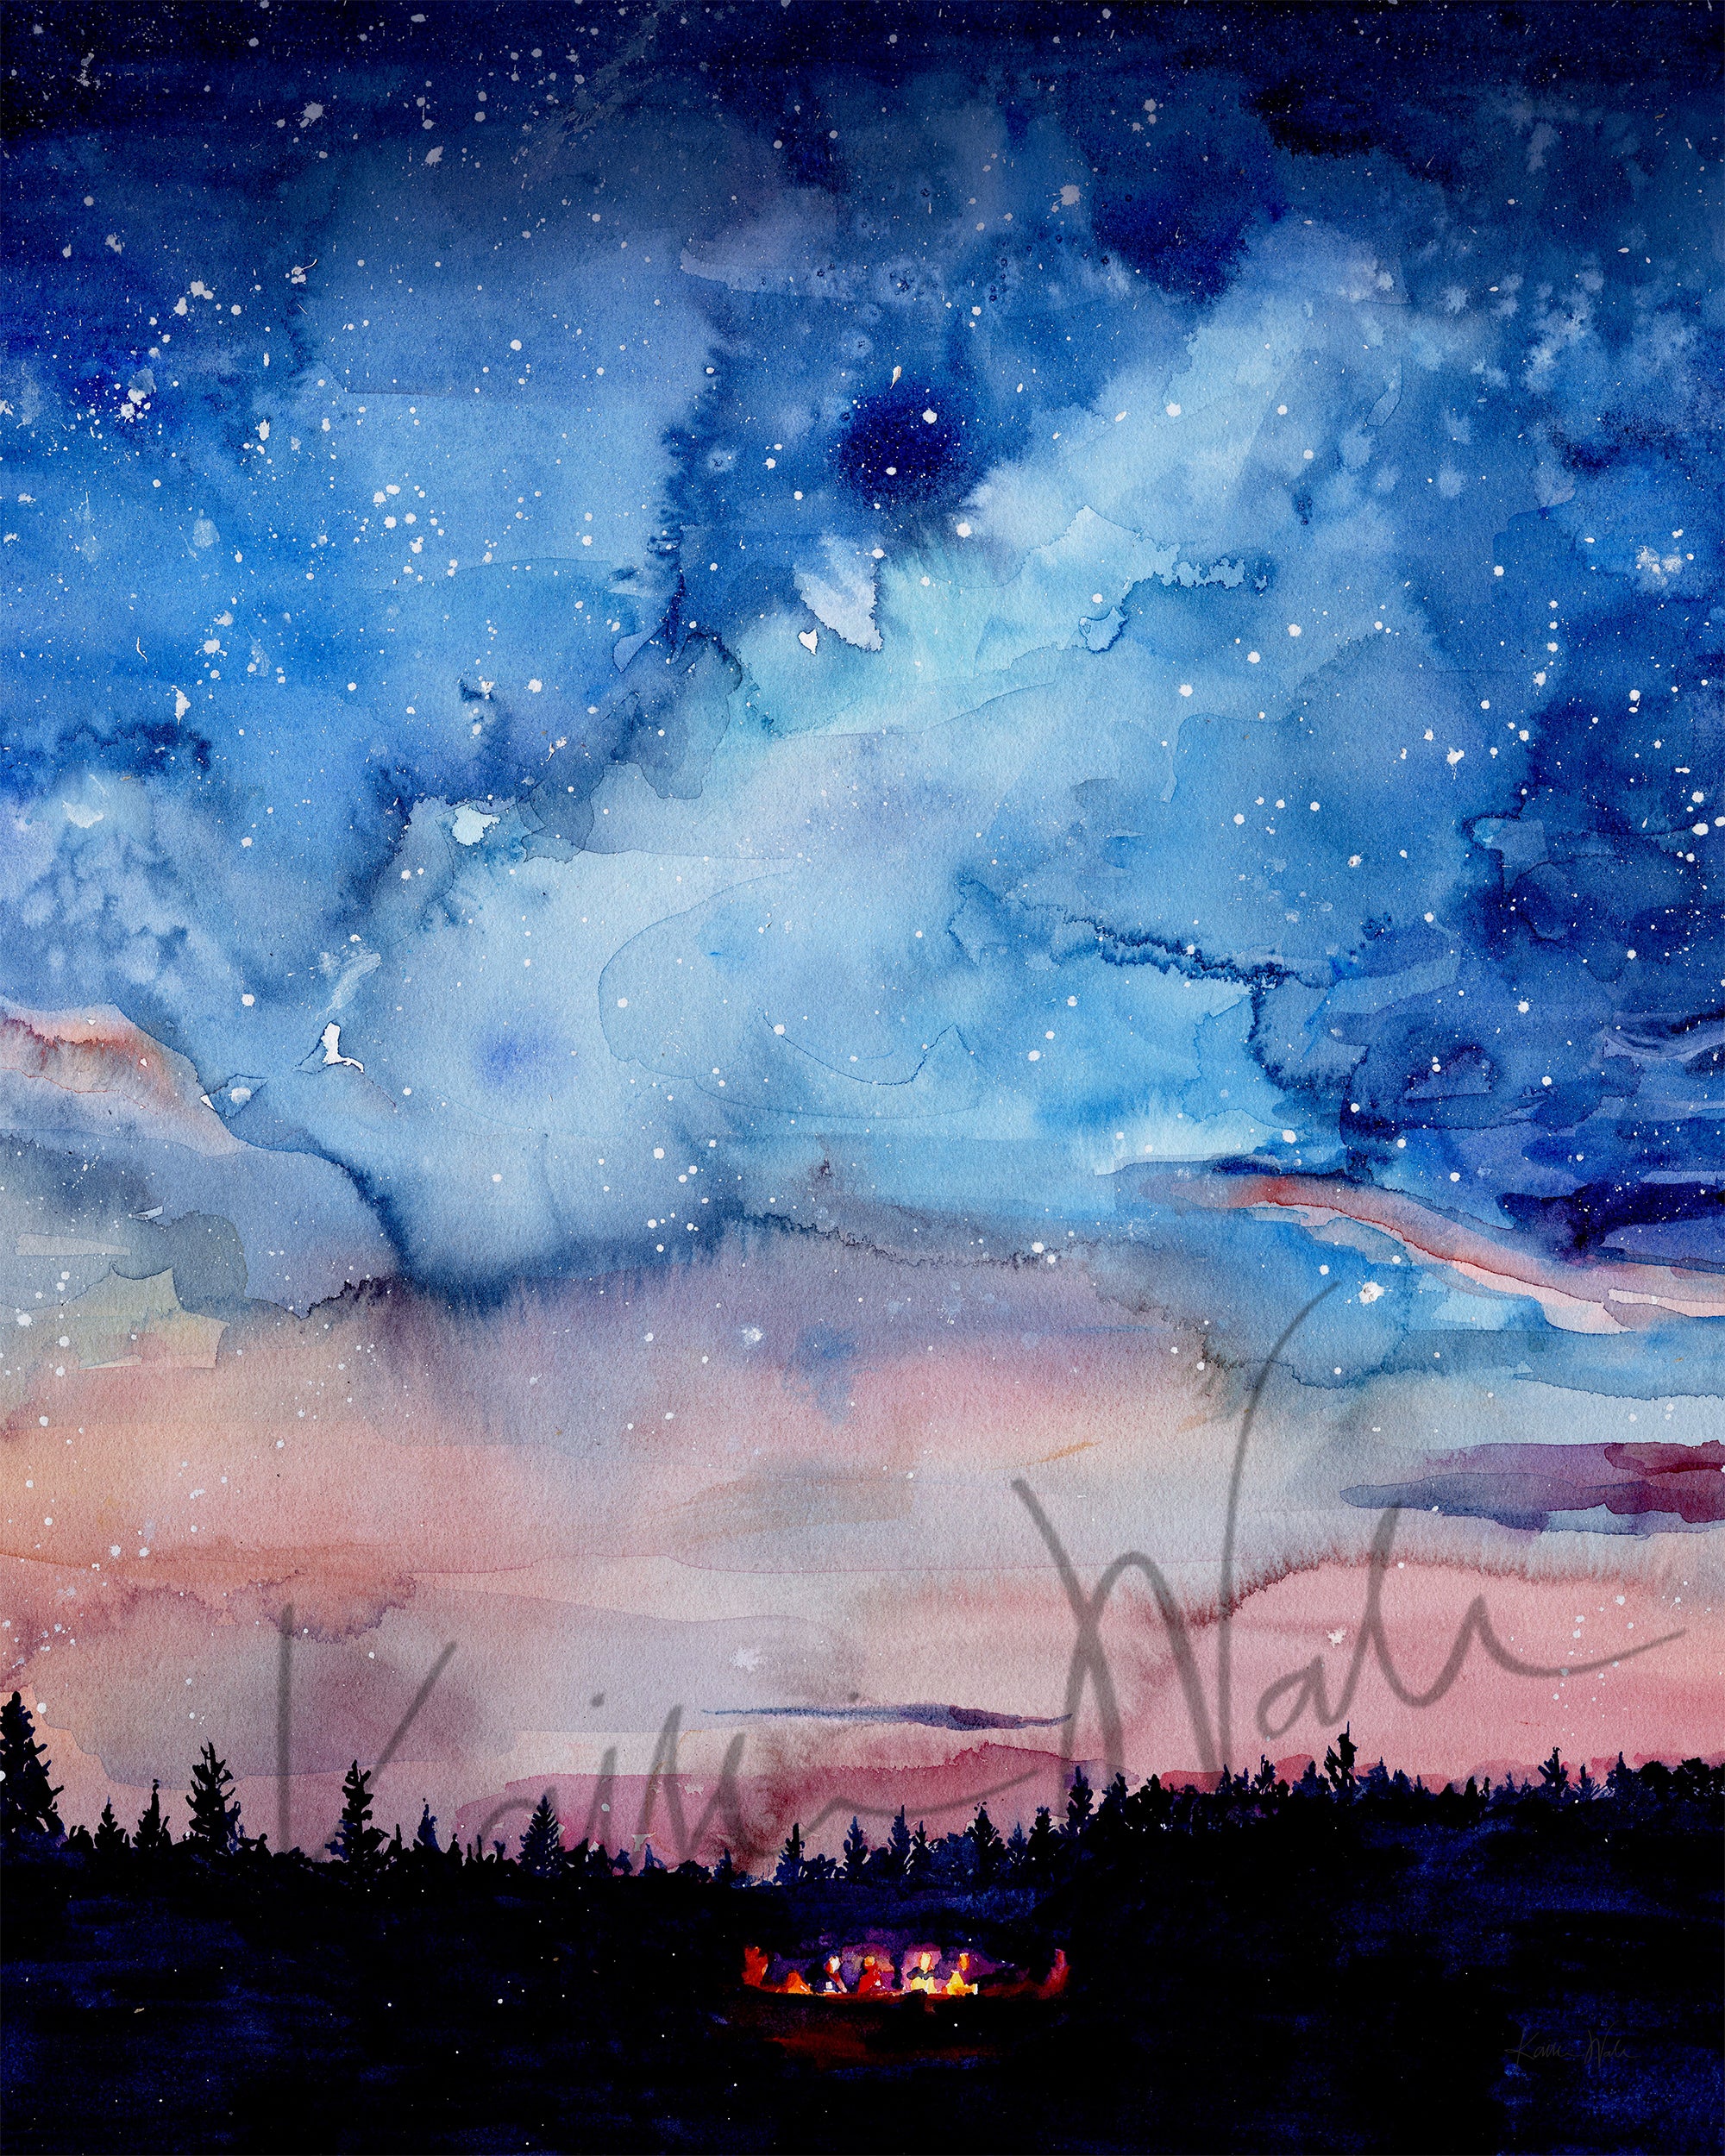 Unframed watercolor painting of a bonfire, night sky, and silhouetted trees.